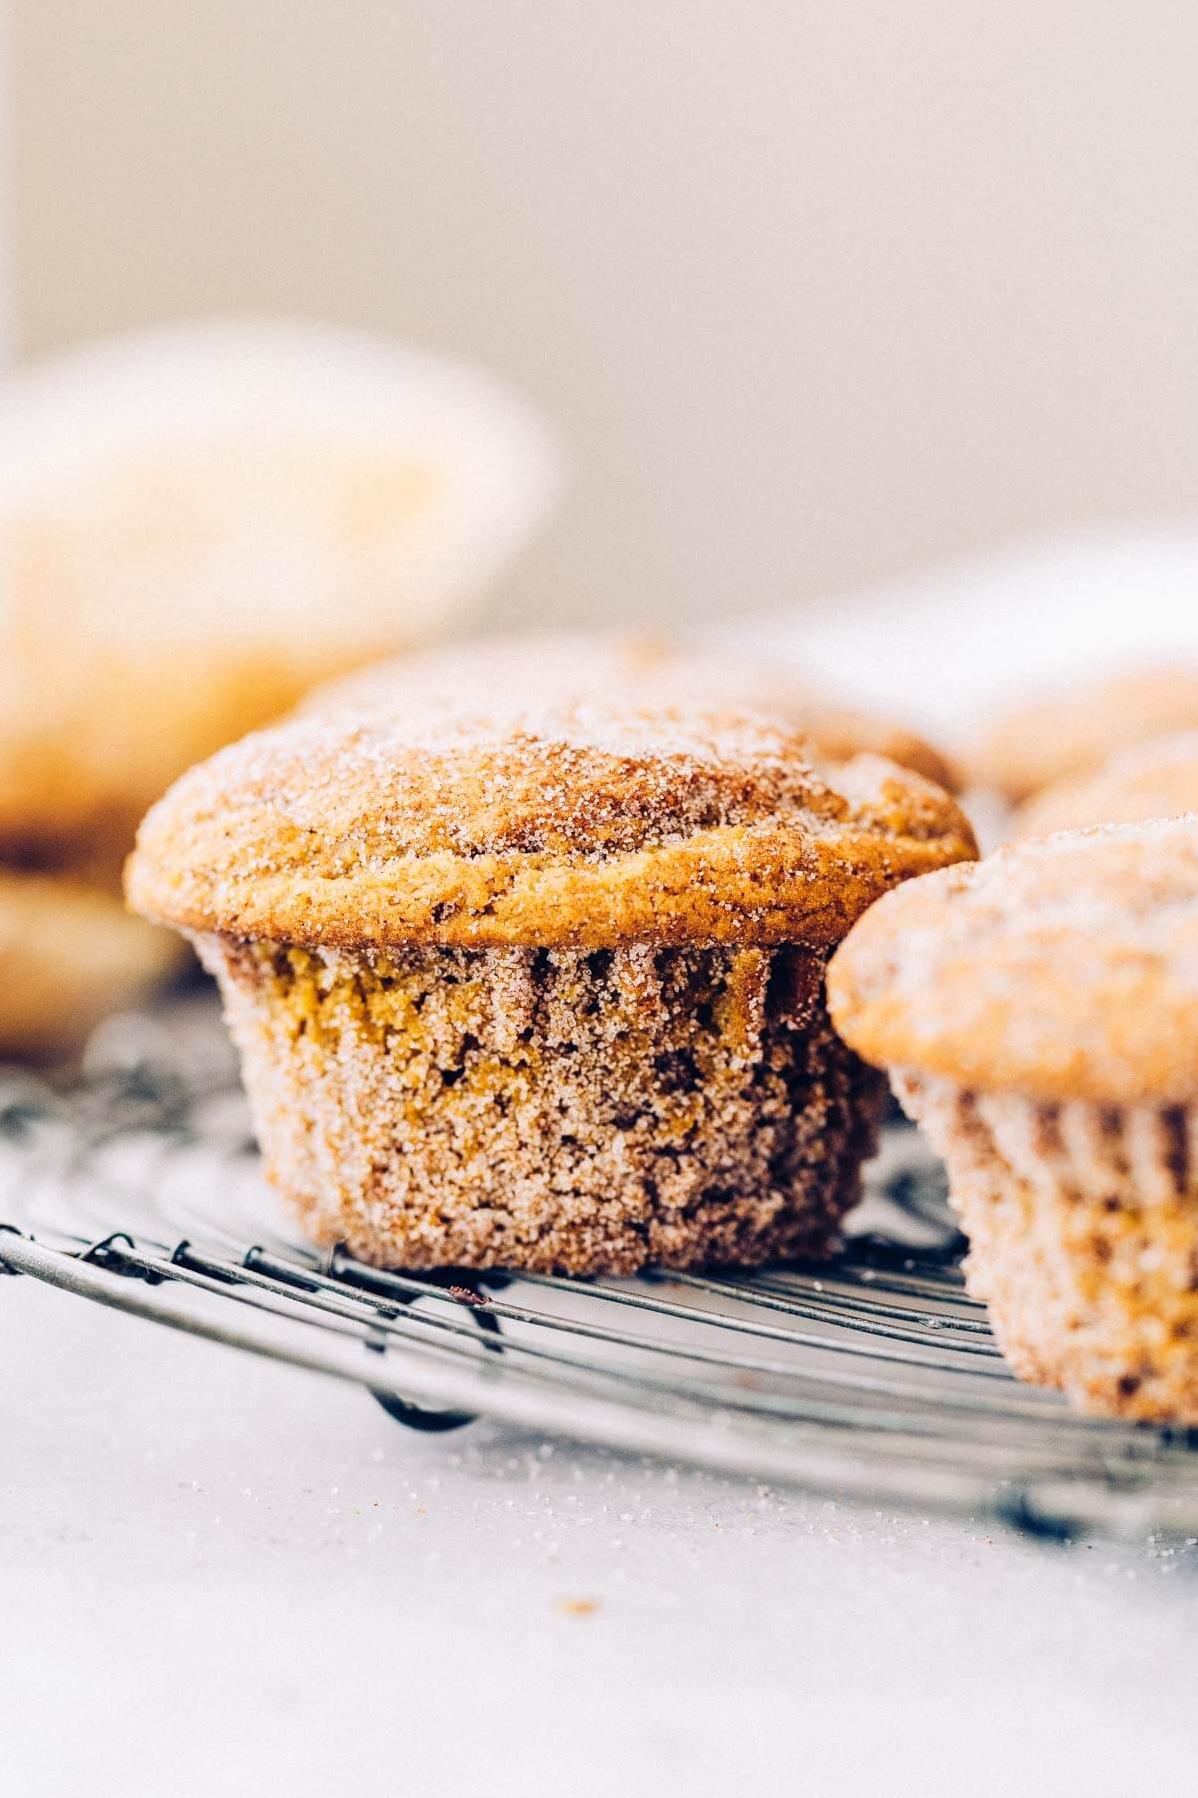  Packed with pumpkin puree, almond flour, and coconut milk, these muffins are both healthy and delicious.